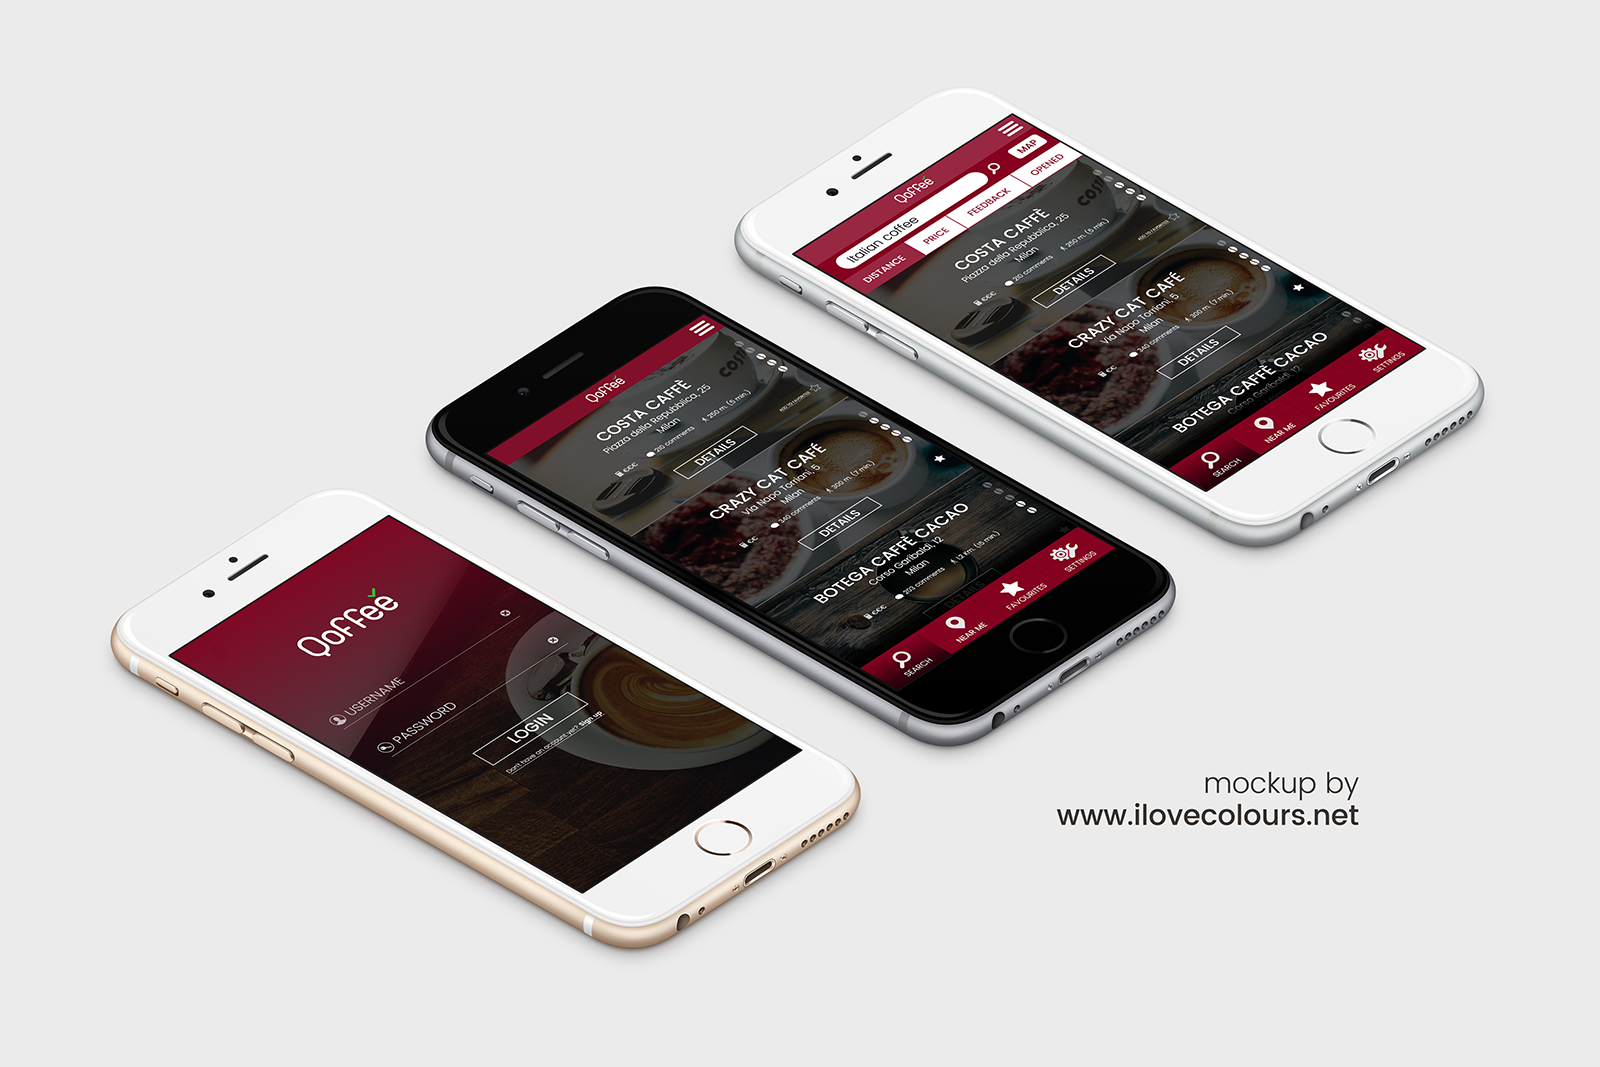 Qoffee - Free mobile coffee app template